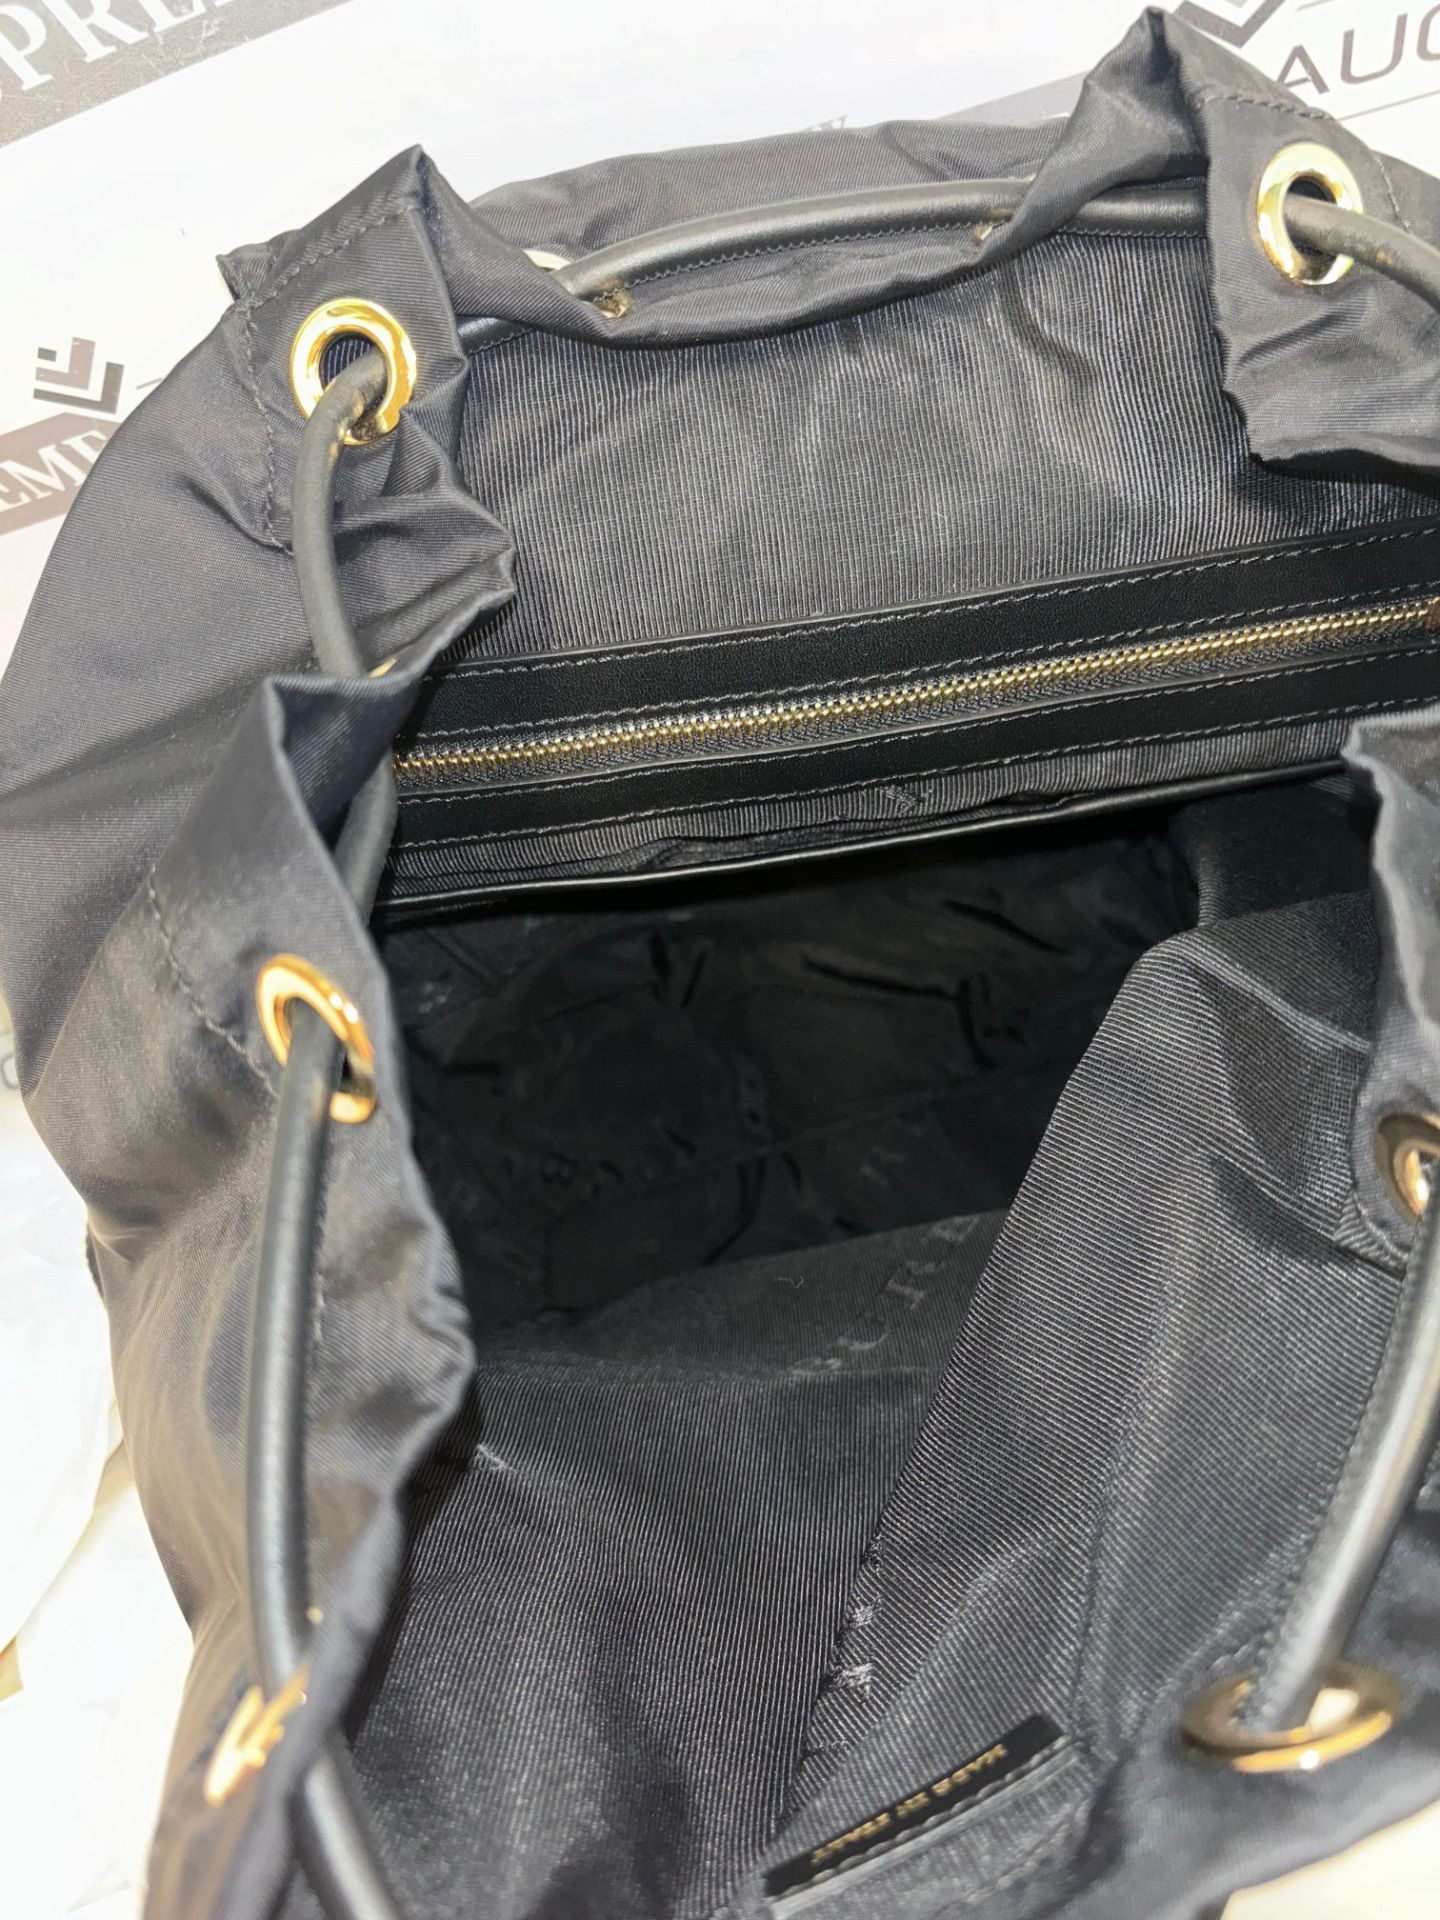 BURBERRY black nylon backpack. Personalised ZYL. 35x35cm - Image 11 of 11